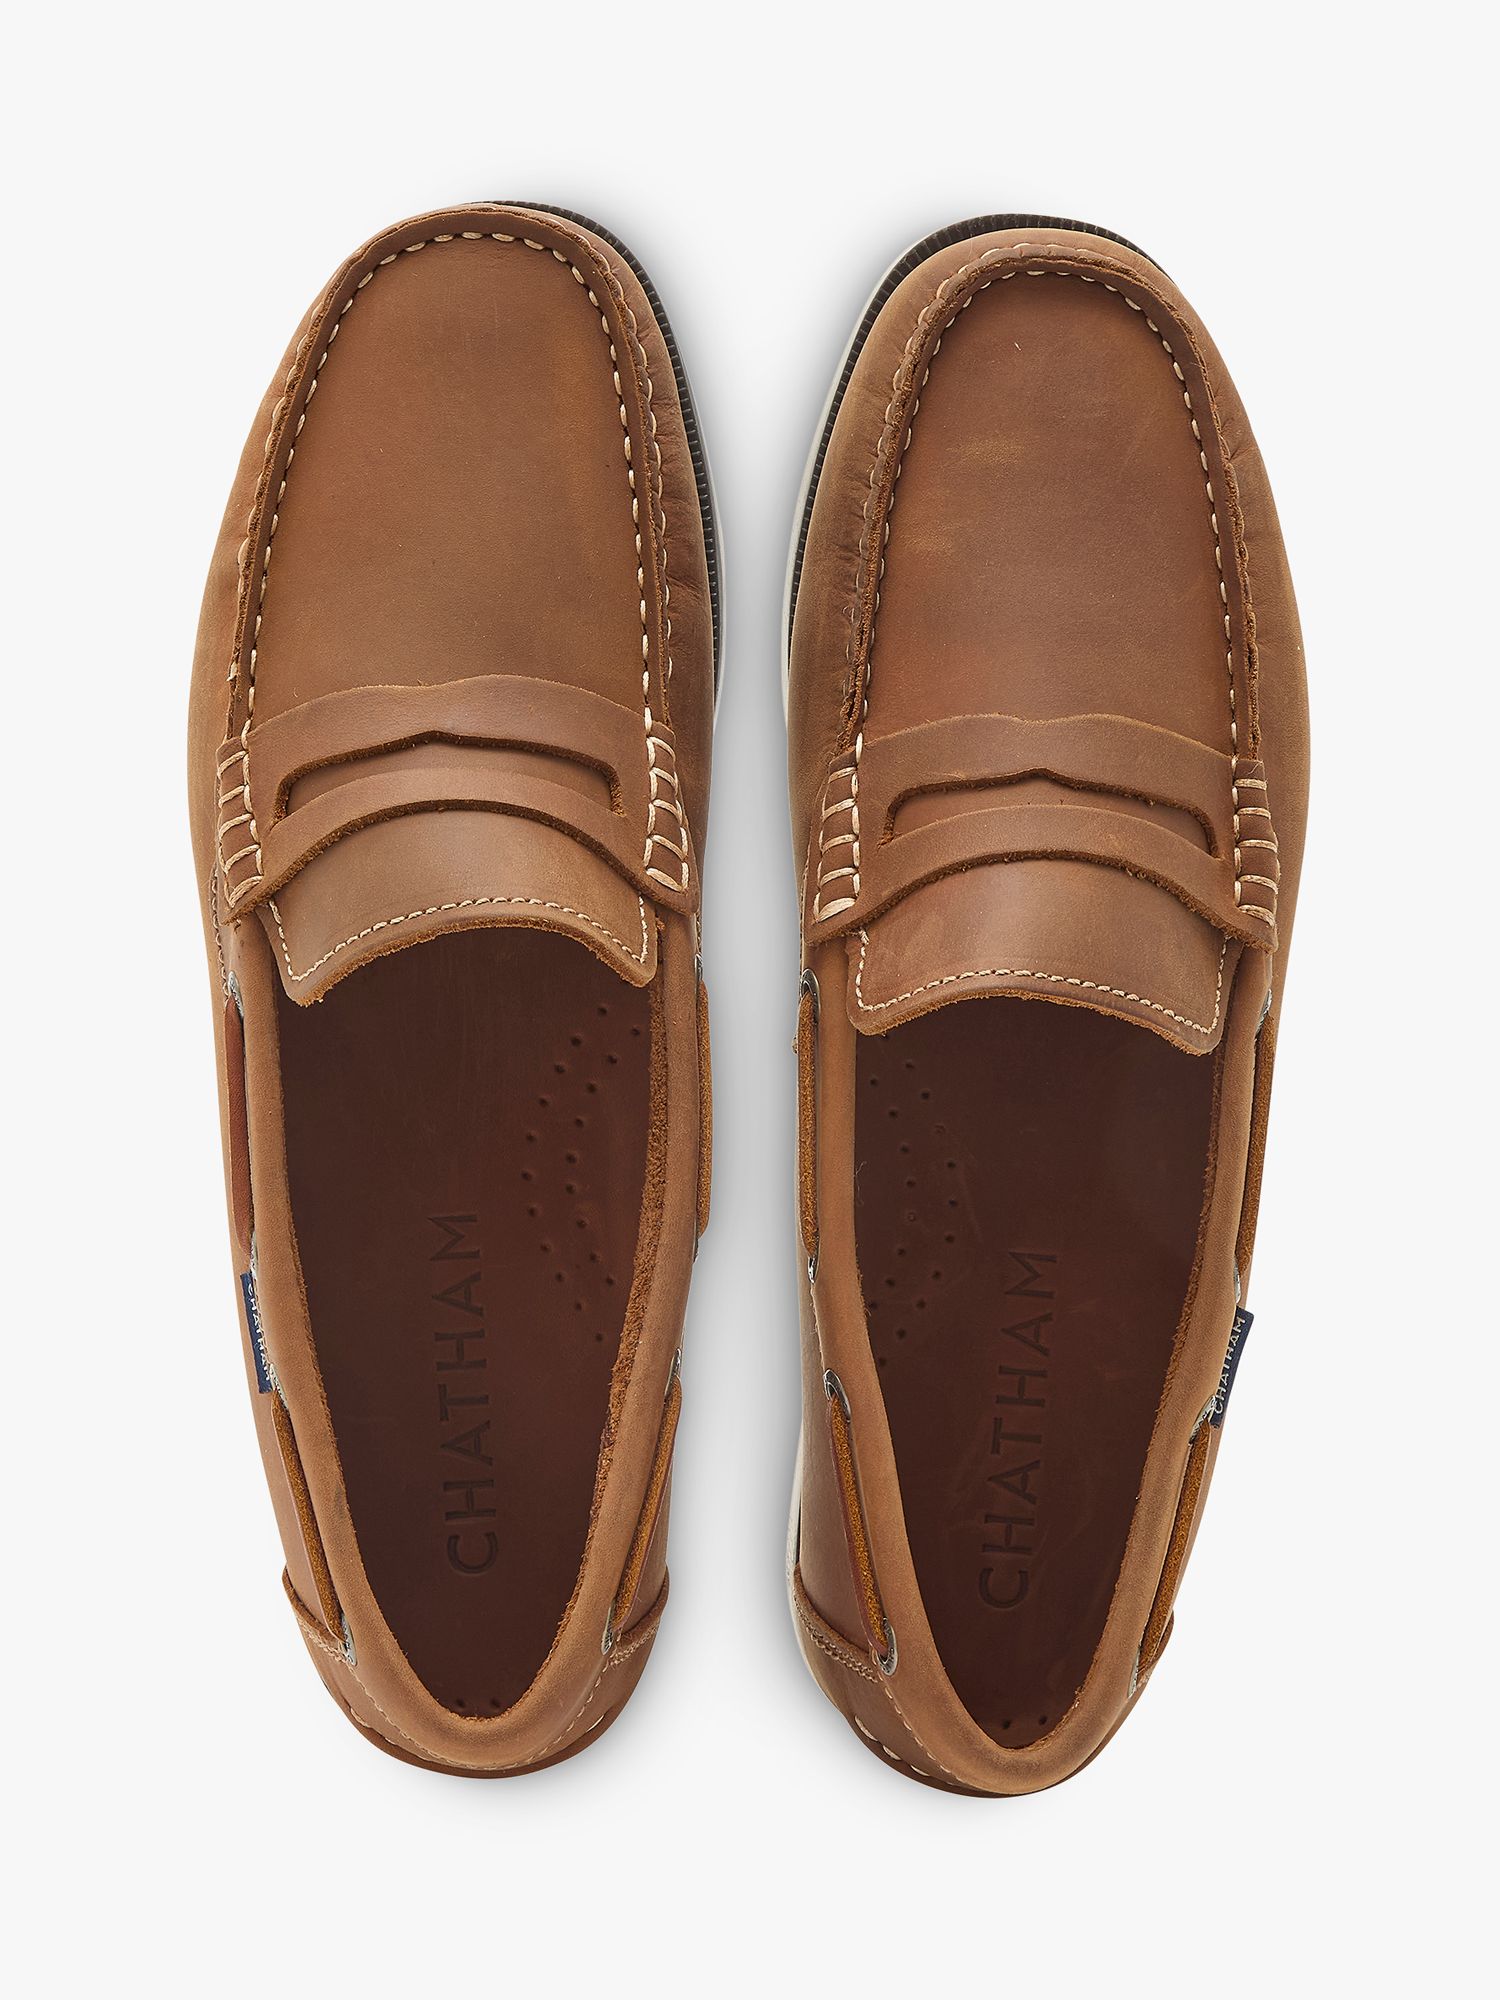 Chatham Shanklin Leather Loafers, Tan, 7